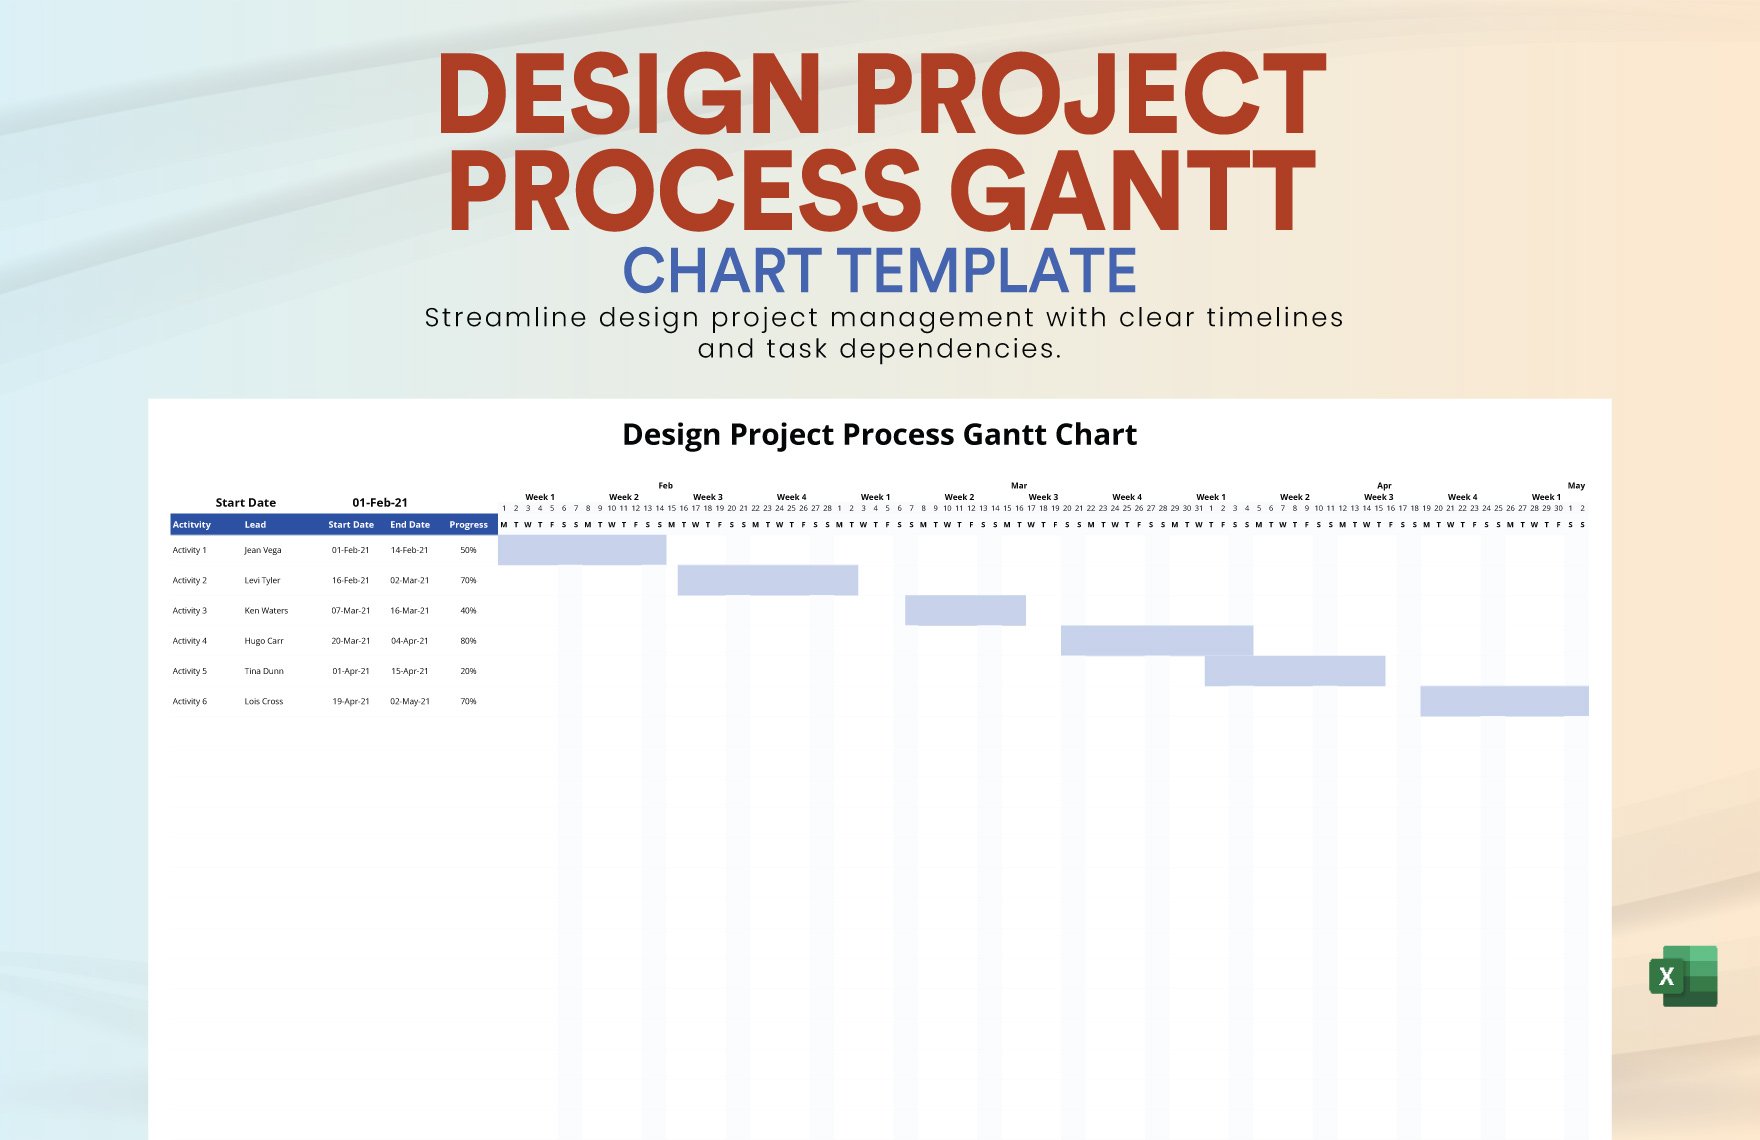 Design Project Process Gantt Chart Template in Excel